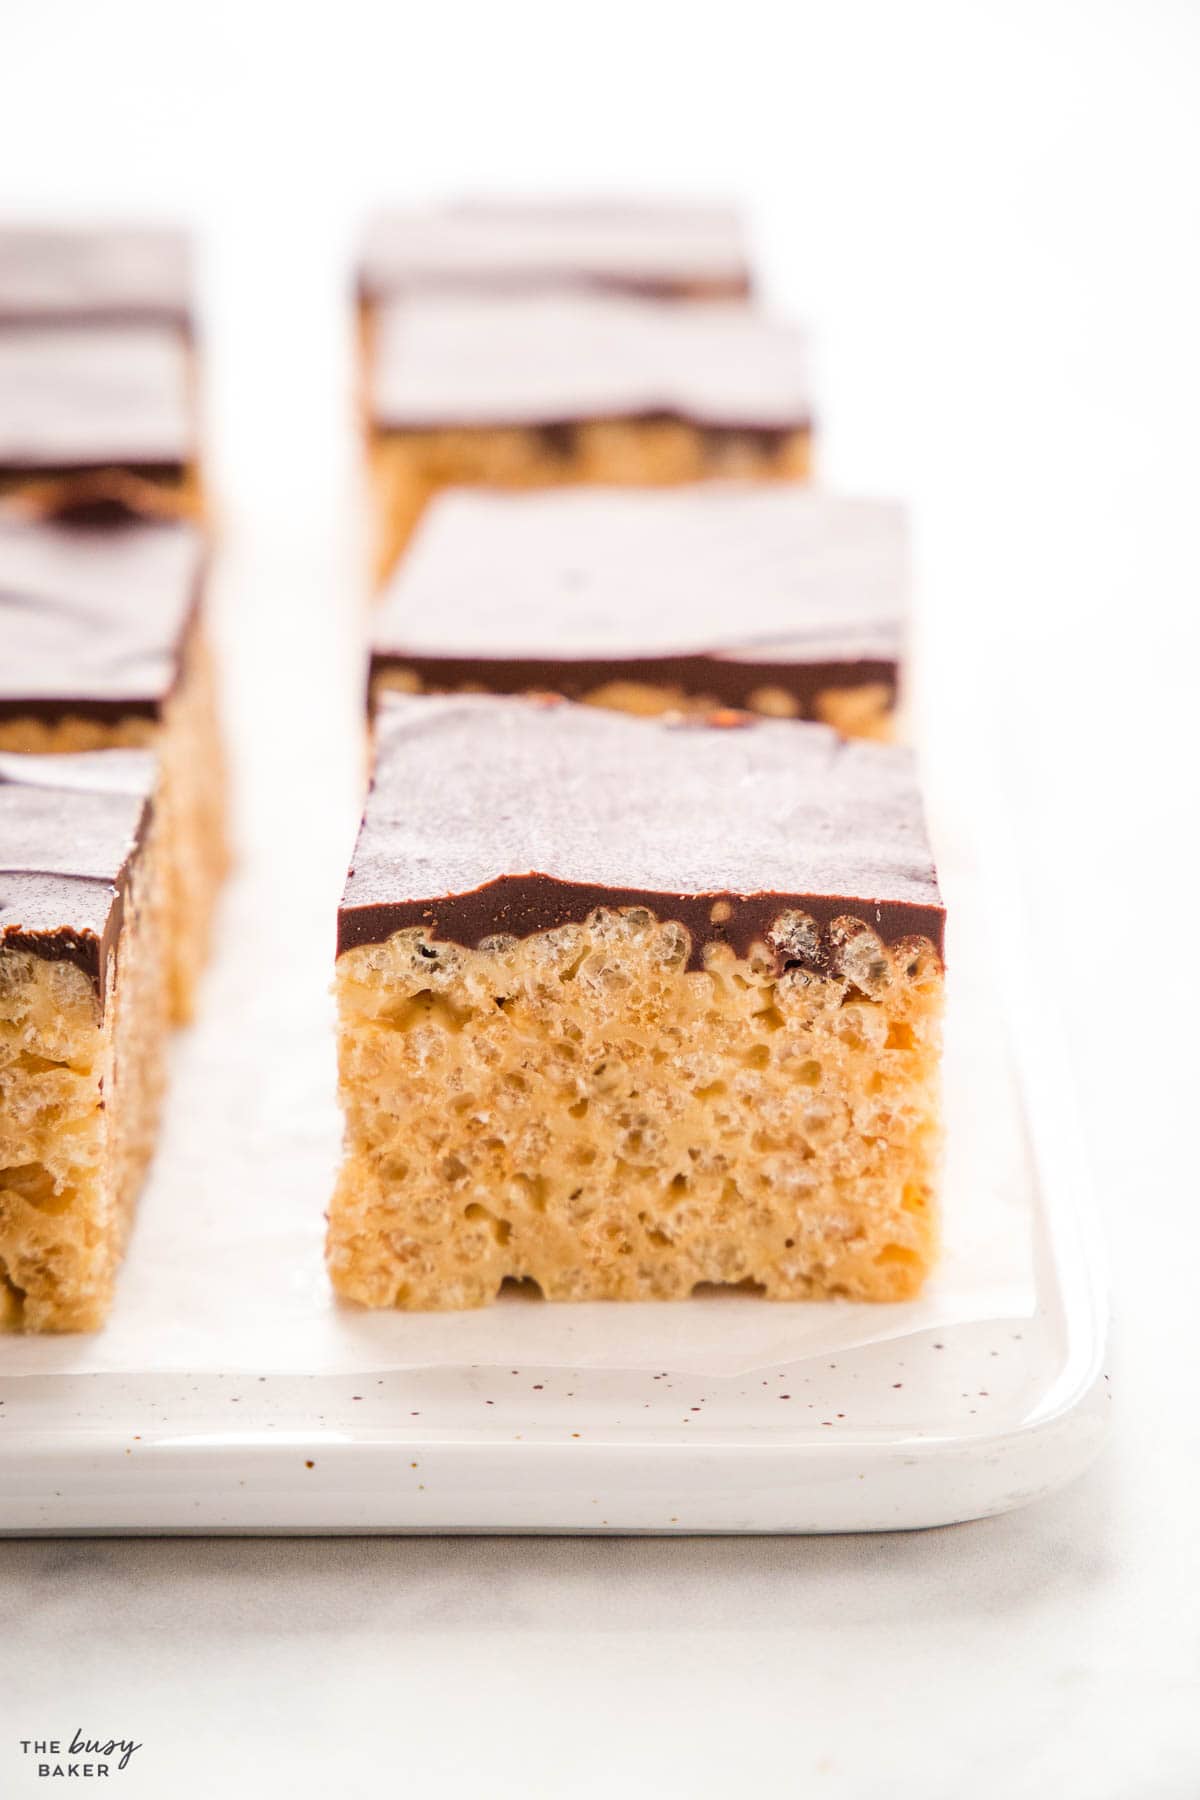 peanut butter rice krispie treats with chocolate topping